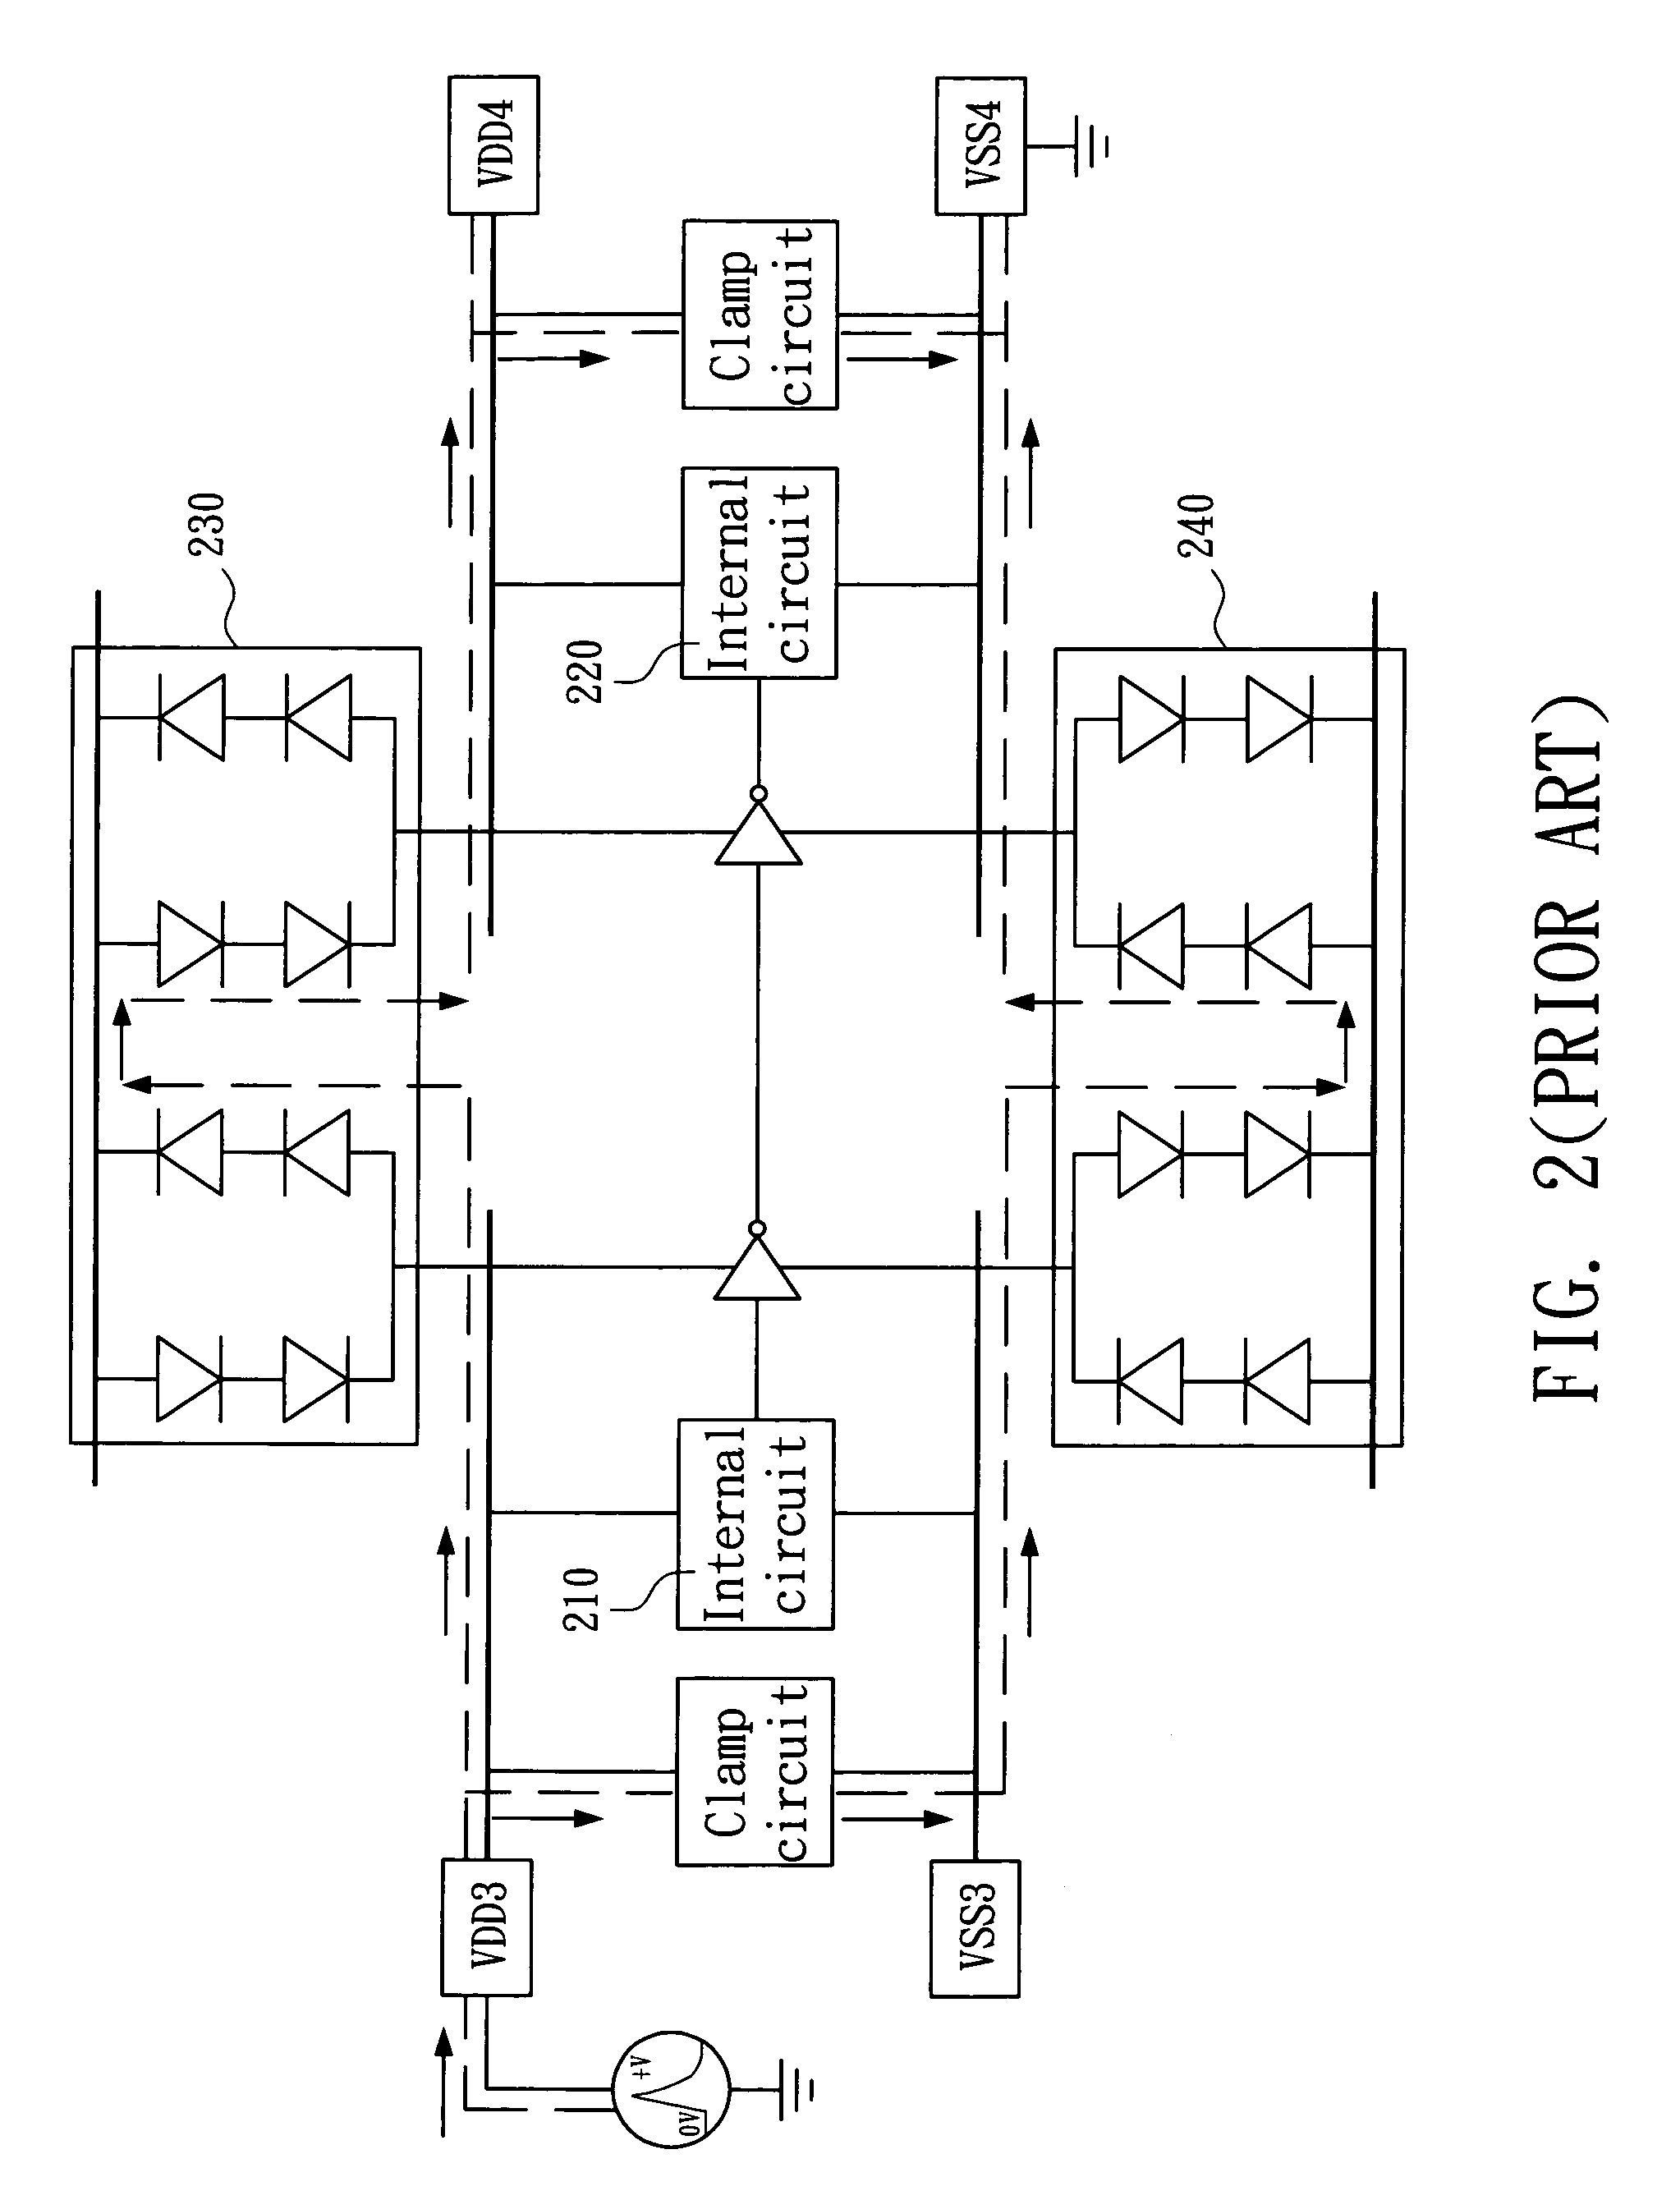 ESD protection circuit between different voltage sources